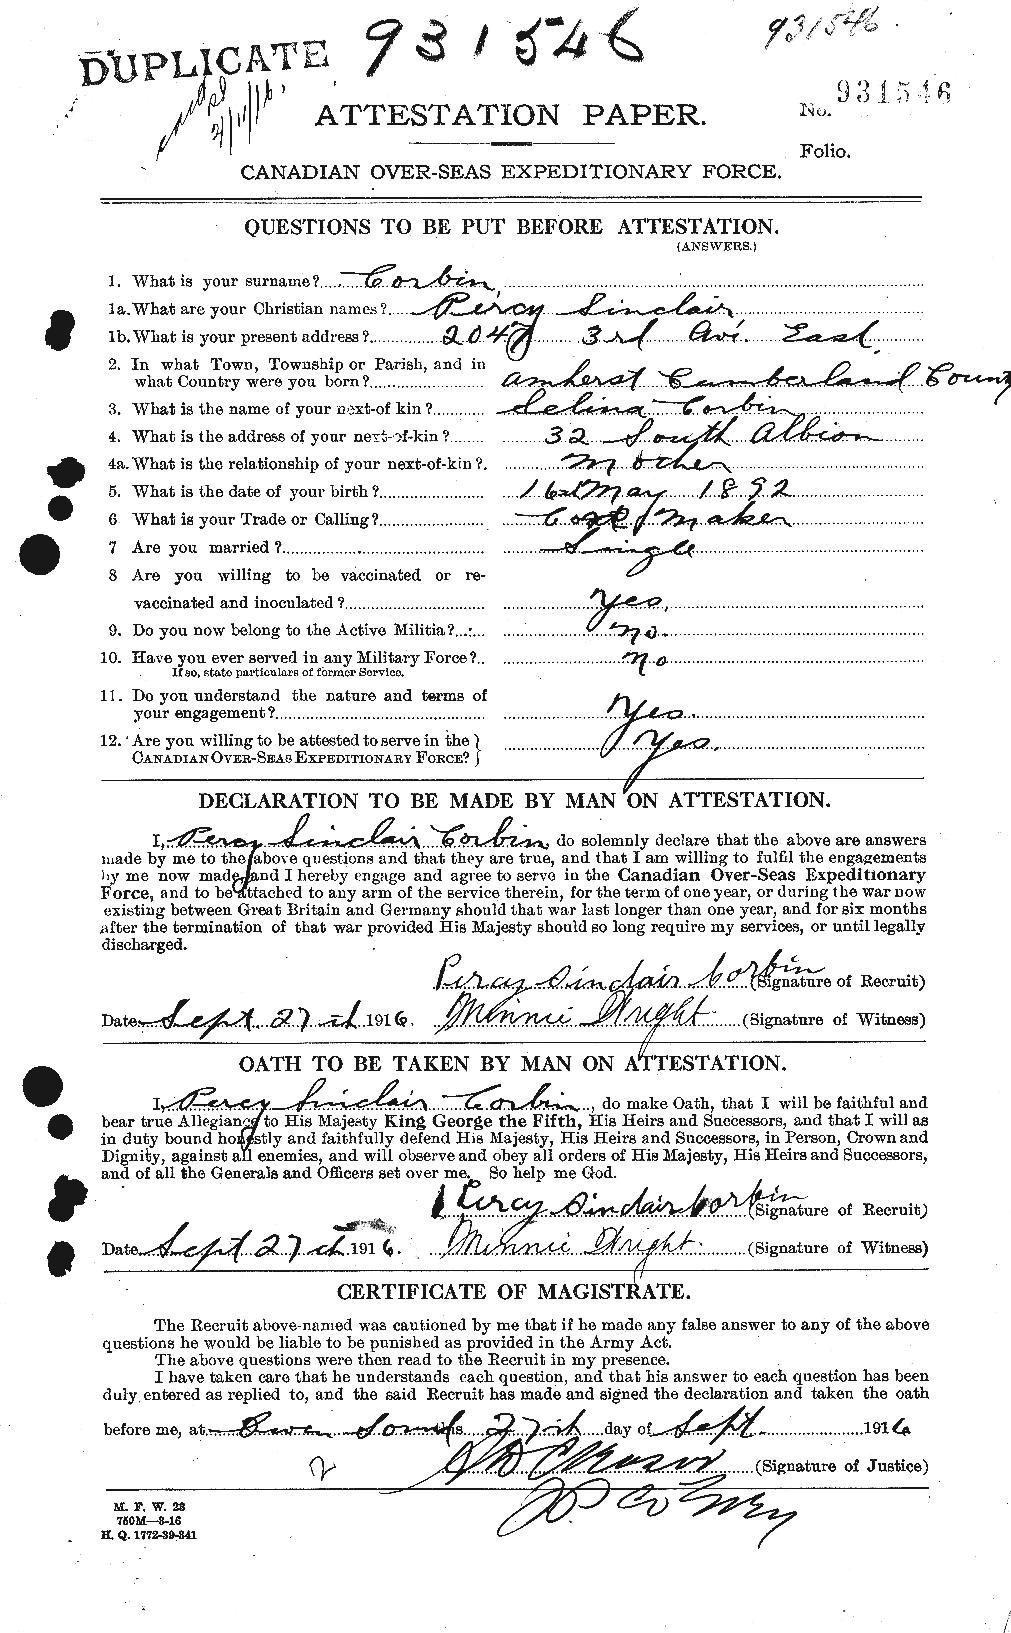 Personnel Records of the First World War - CEF 055665a